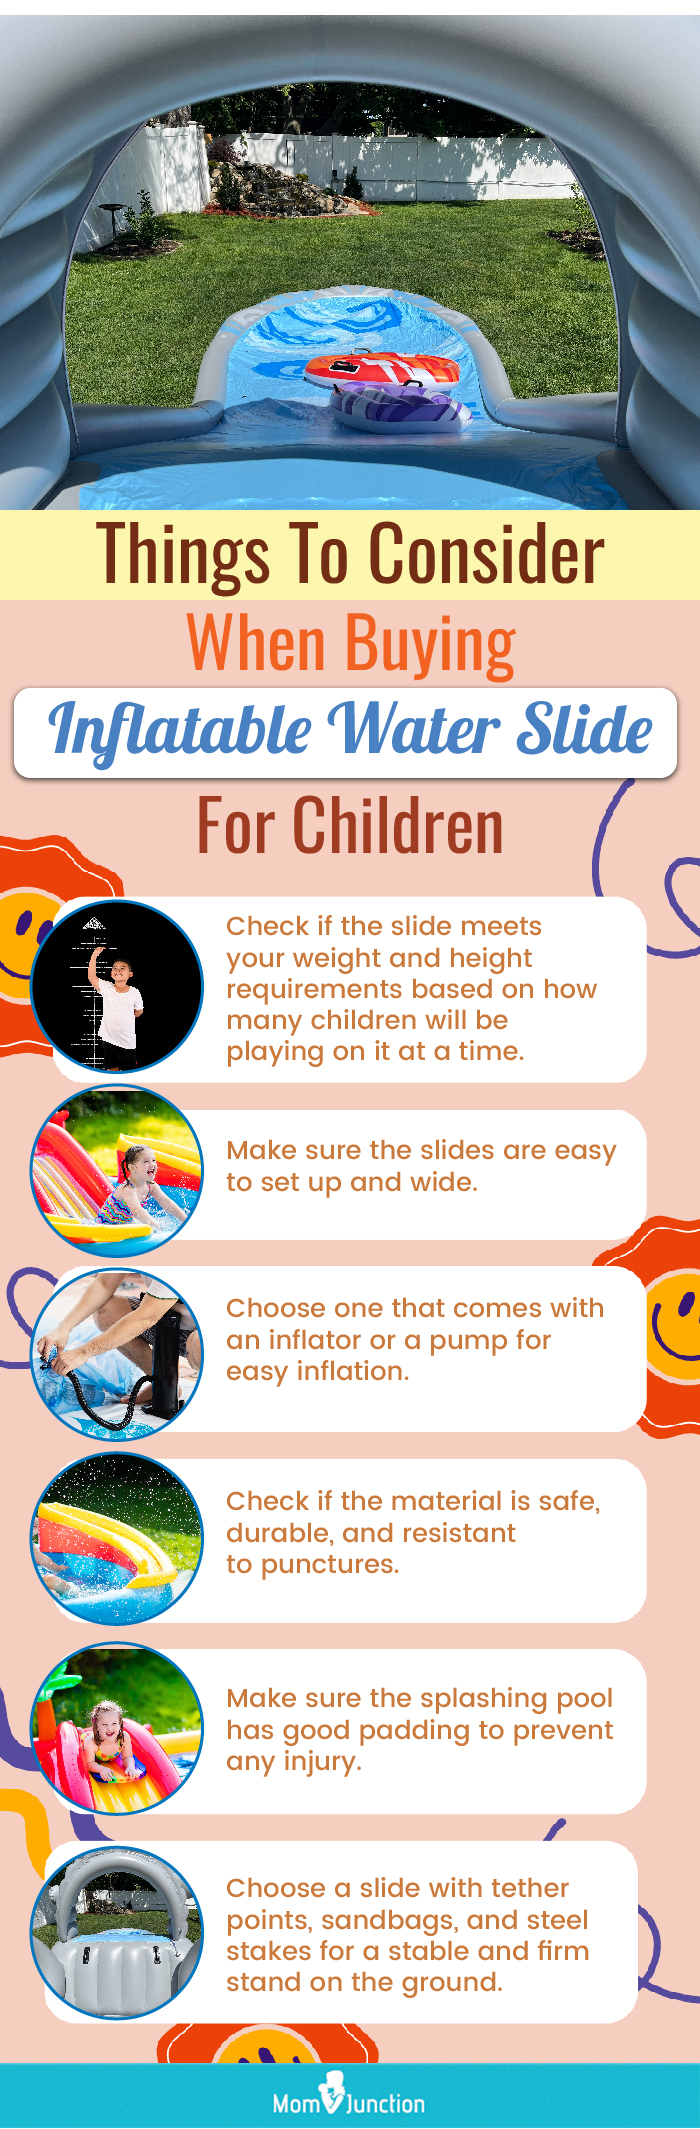 Things To Consider When Buying Inflatable Water Slide For Children (infographic)